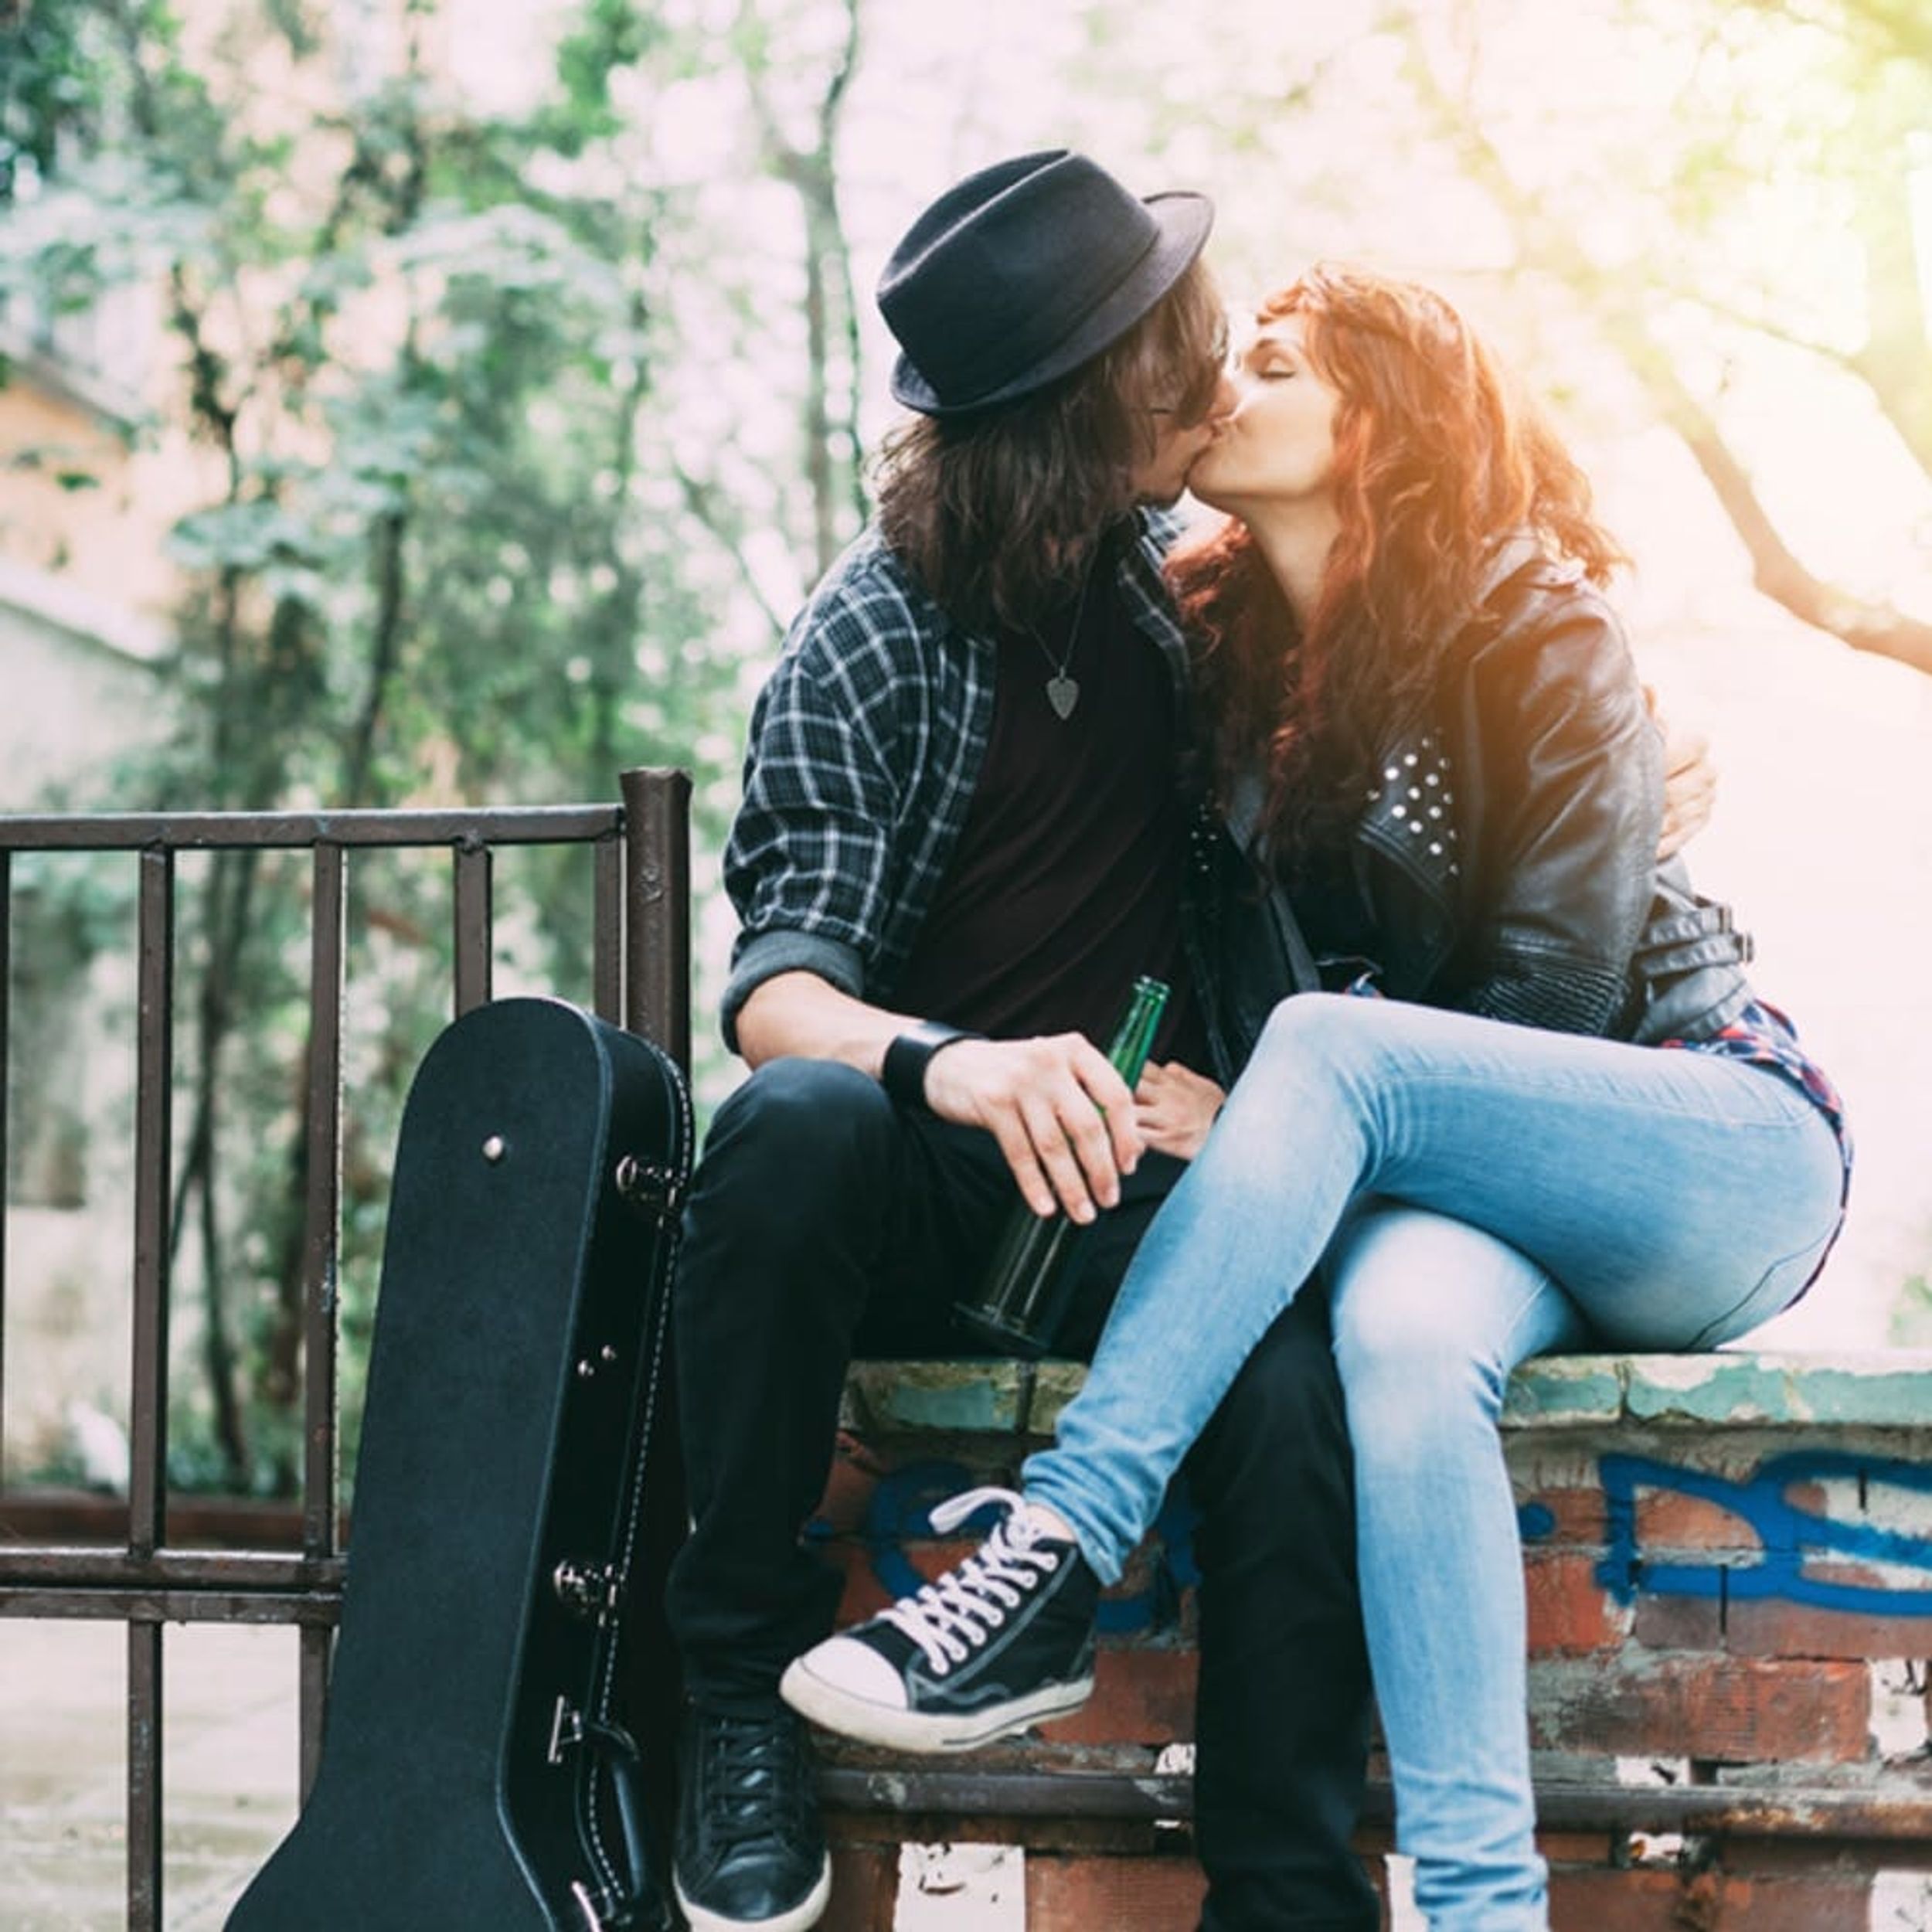 4 Tips for Becoming a Better Kisser According to Science